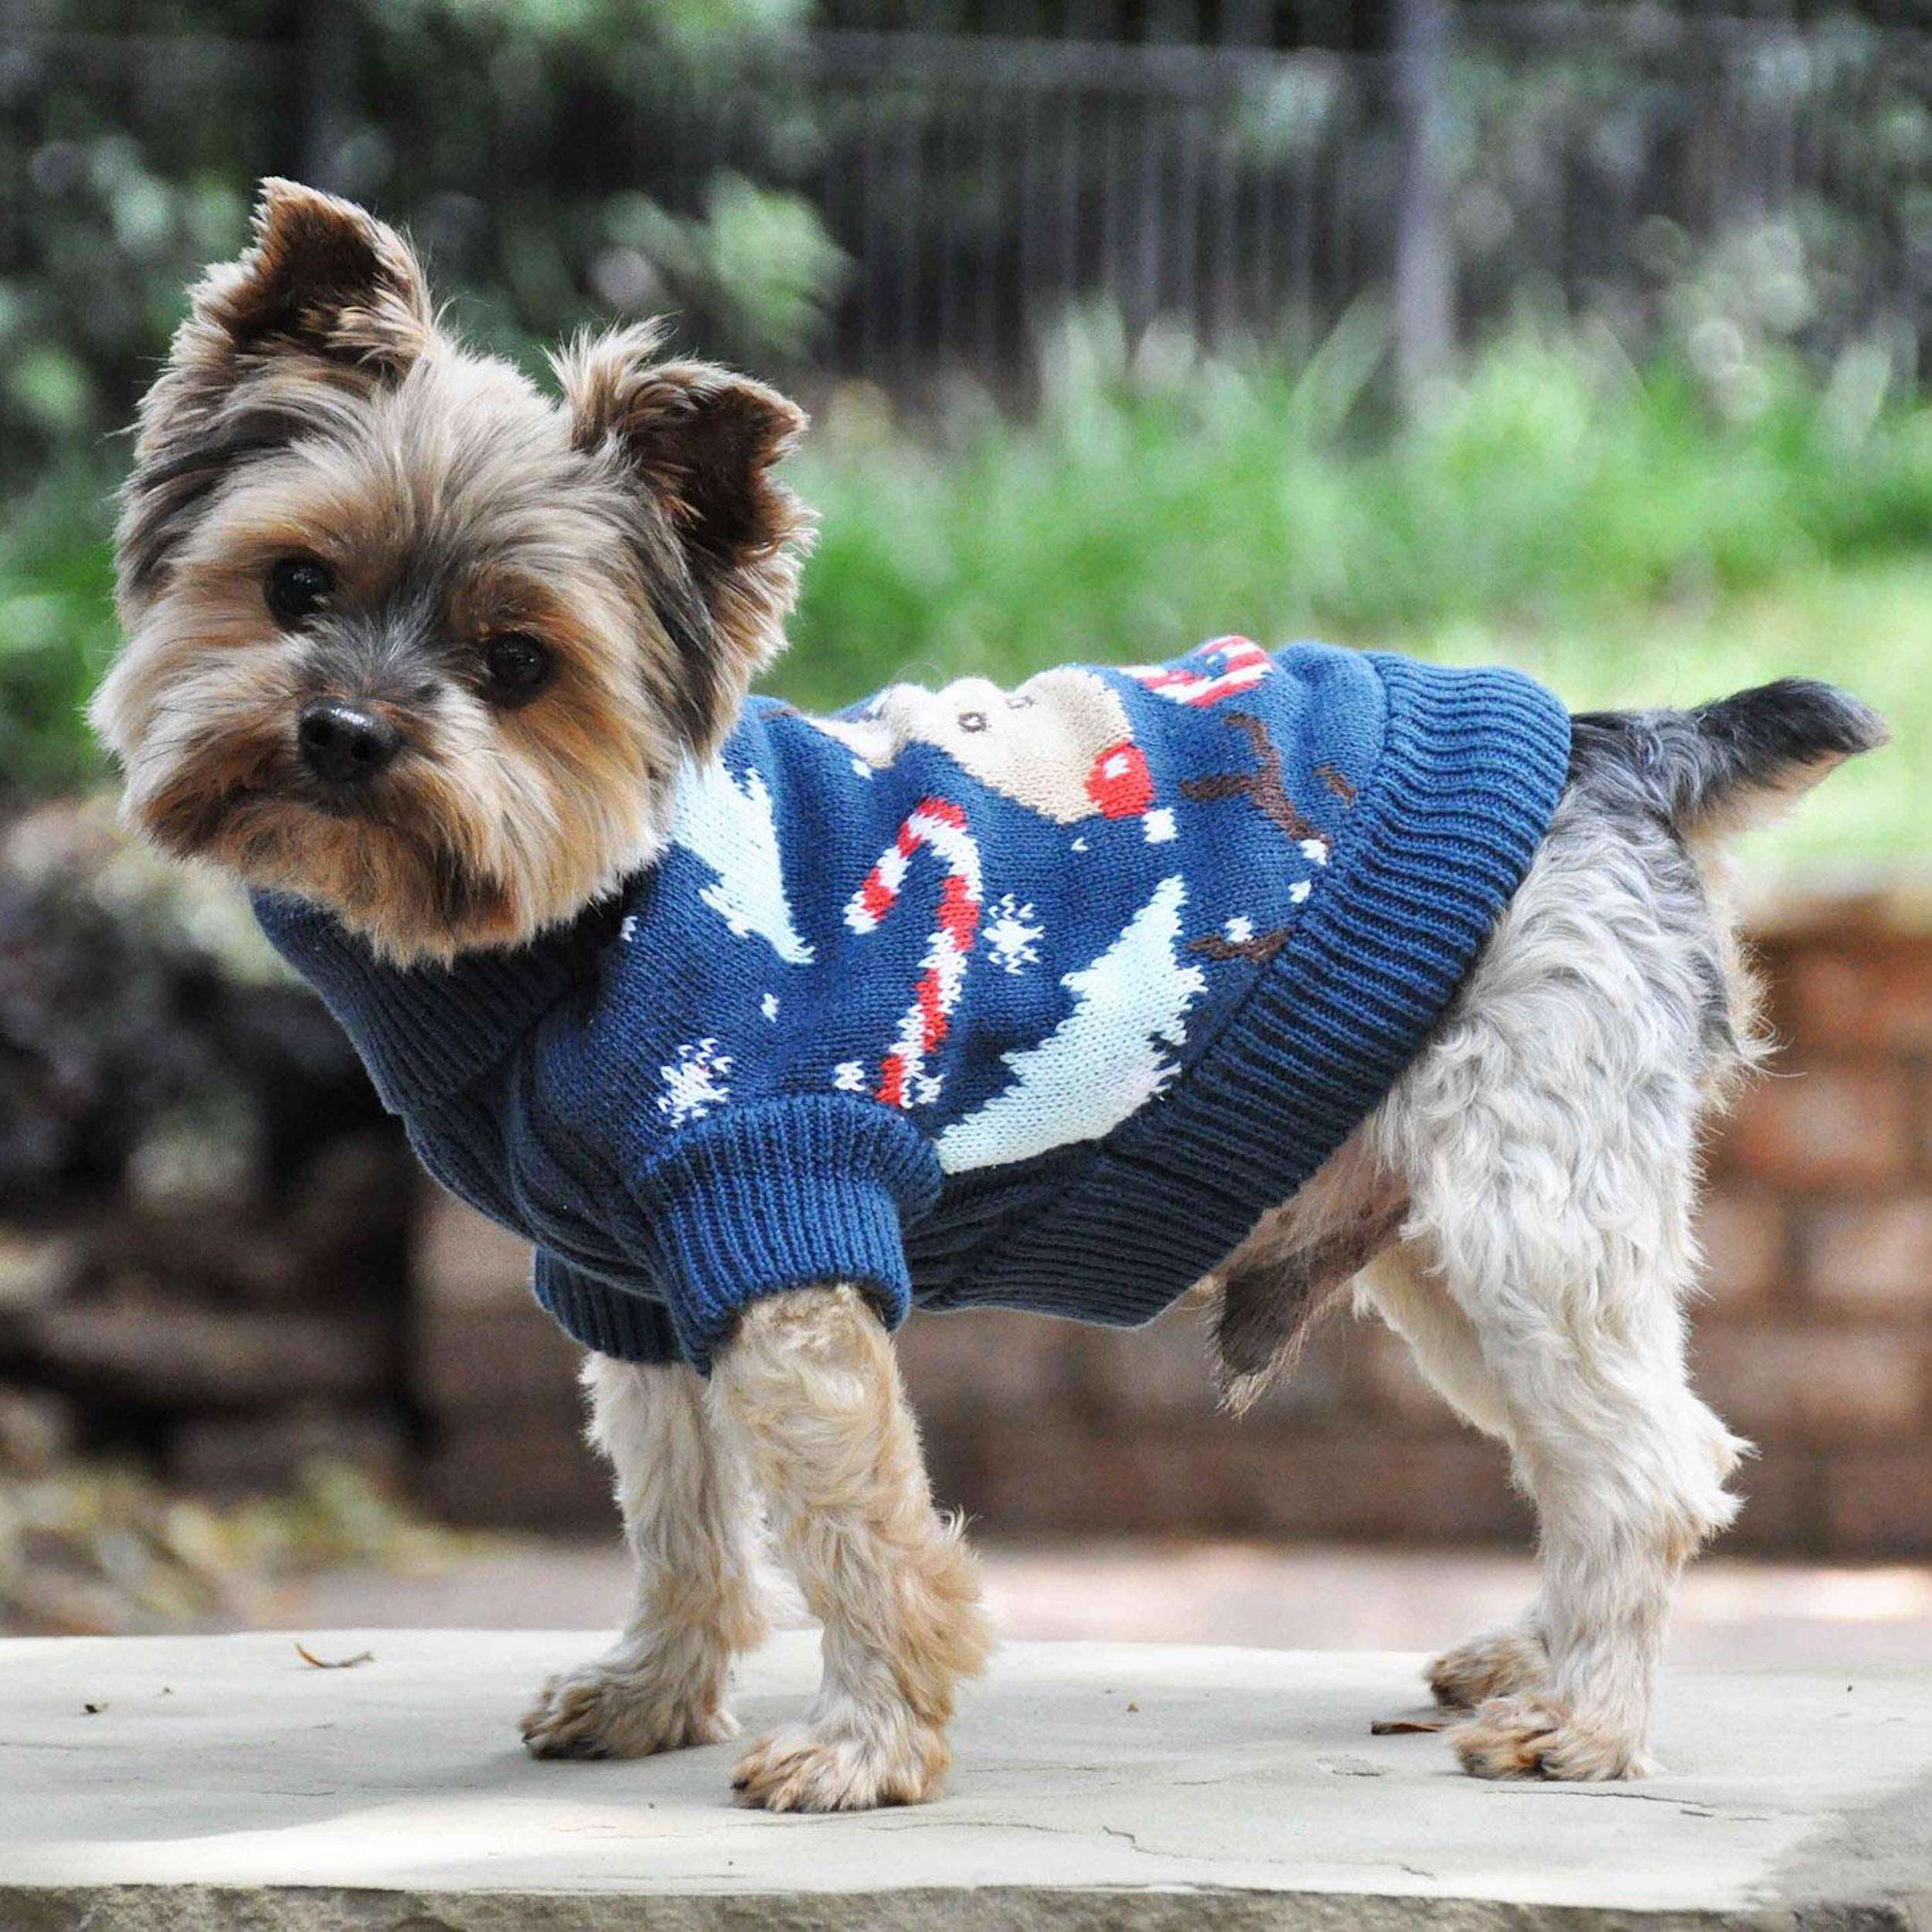 COMBED-COTTON-CABLE-KNIT-DOG-SWEATER-UGLY-REINDEER-HOLIDAY